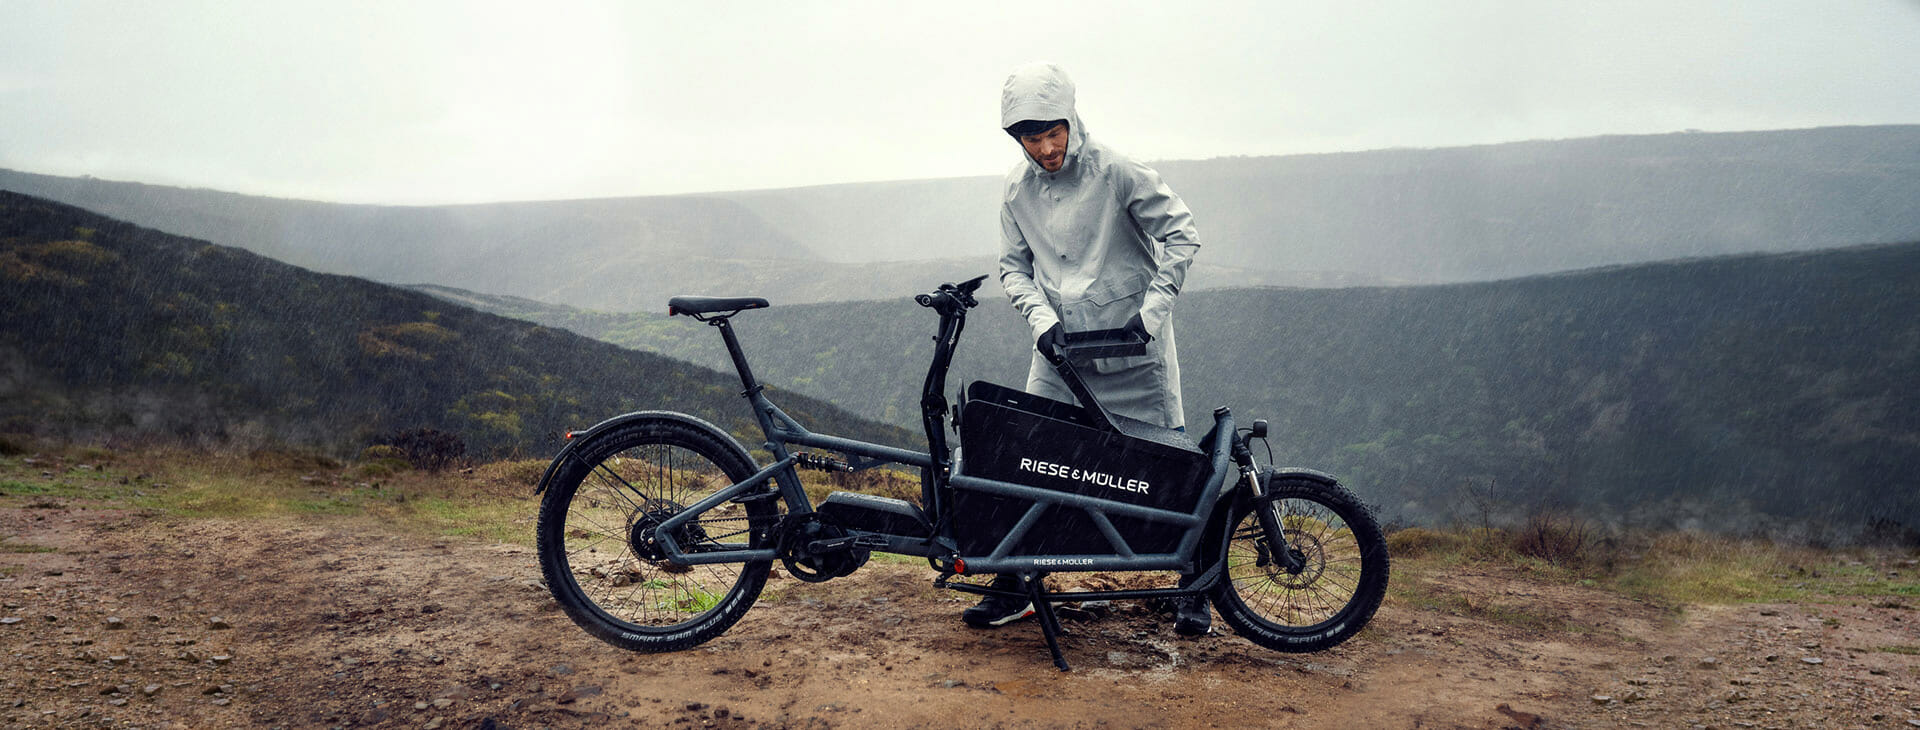 riese-muller-load-60-foldable-ebike